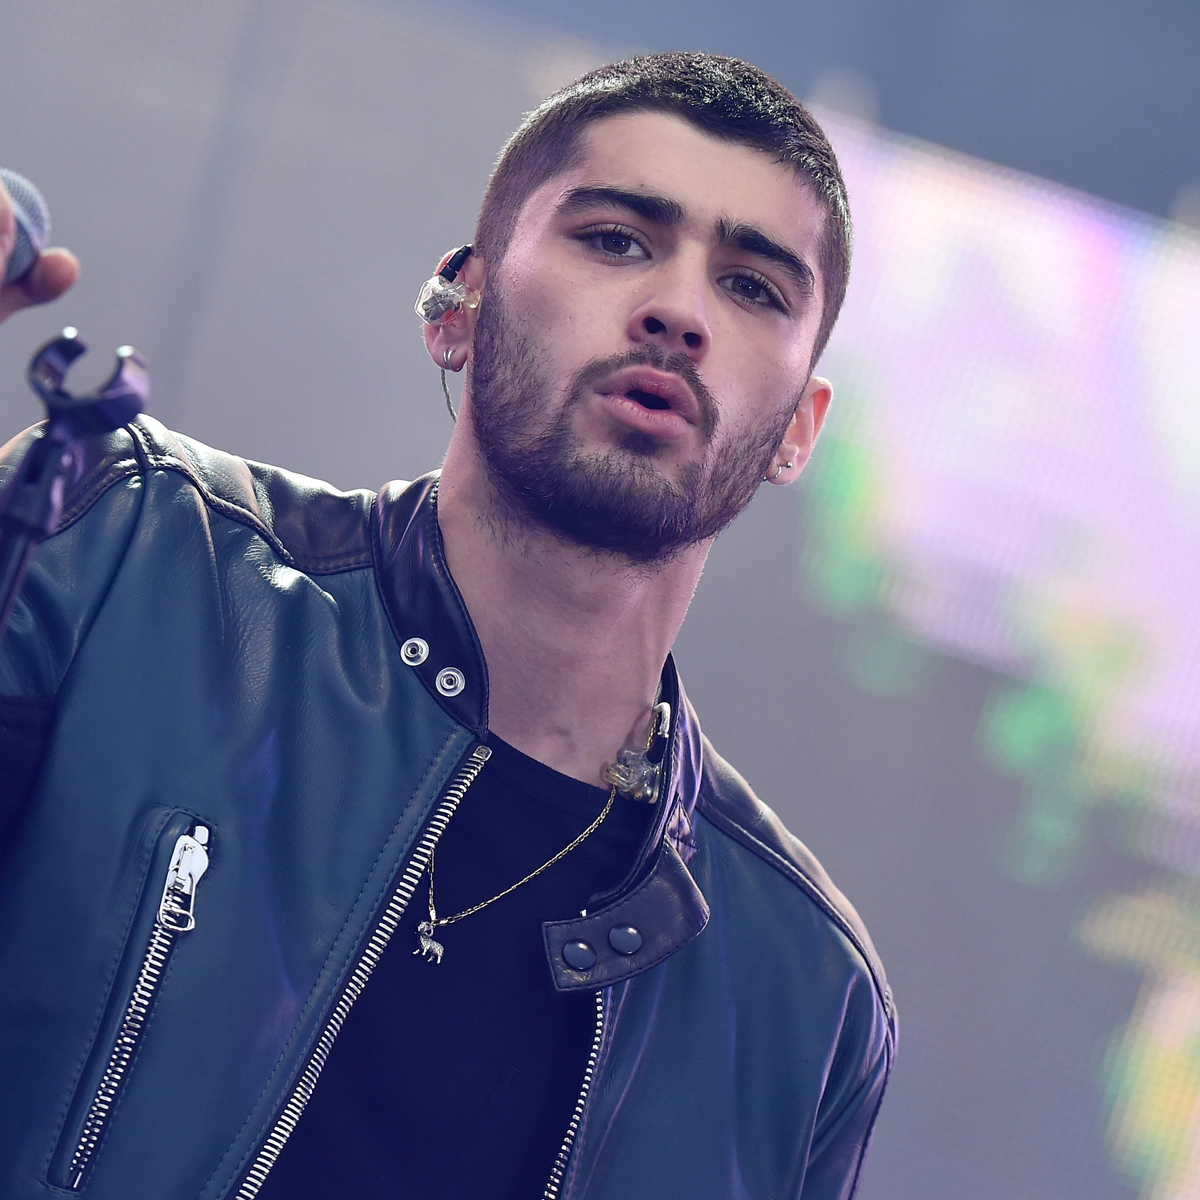 Zayn Malik’s Steamy Song “Love Like This” Will Make Your Heart Race